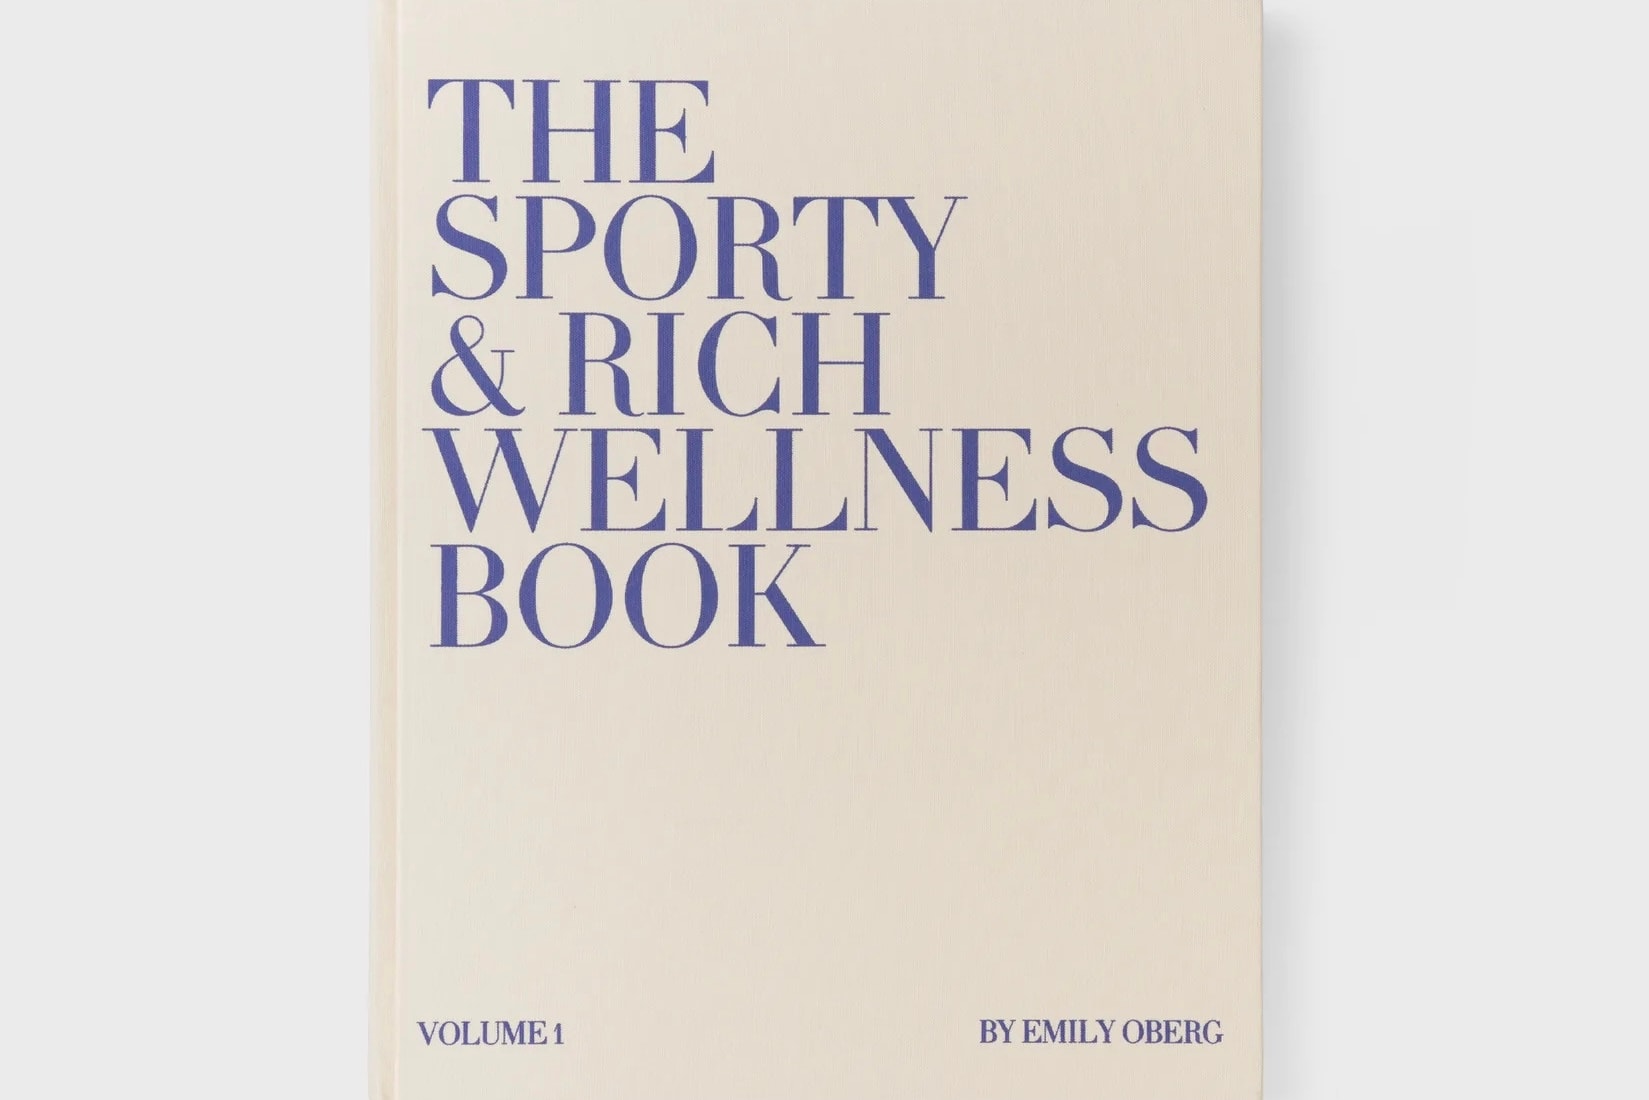 Sporty & Rich 发布全新精装书籍 《The Sporty & Rich Wellness Book》